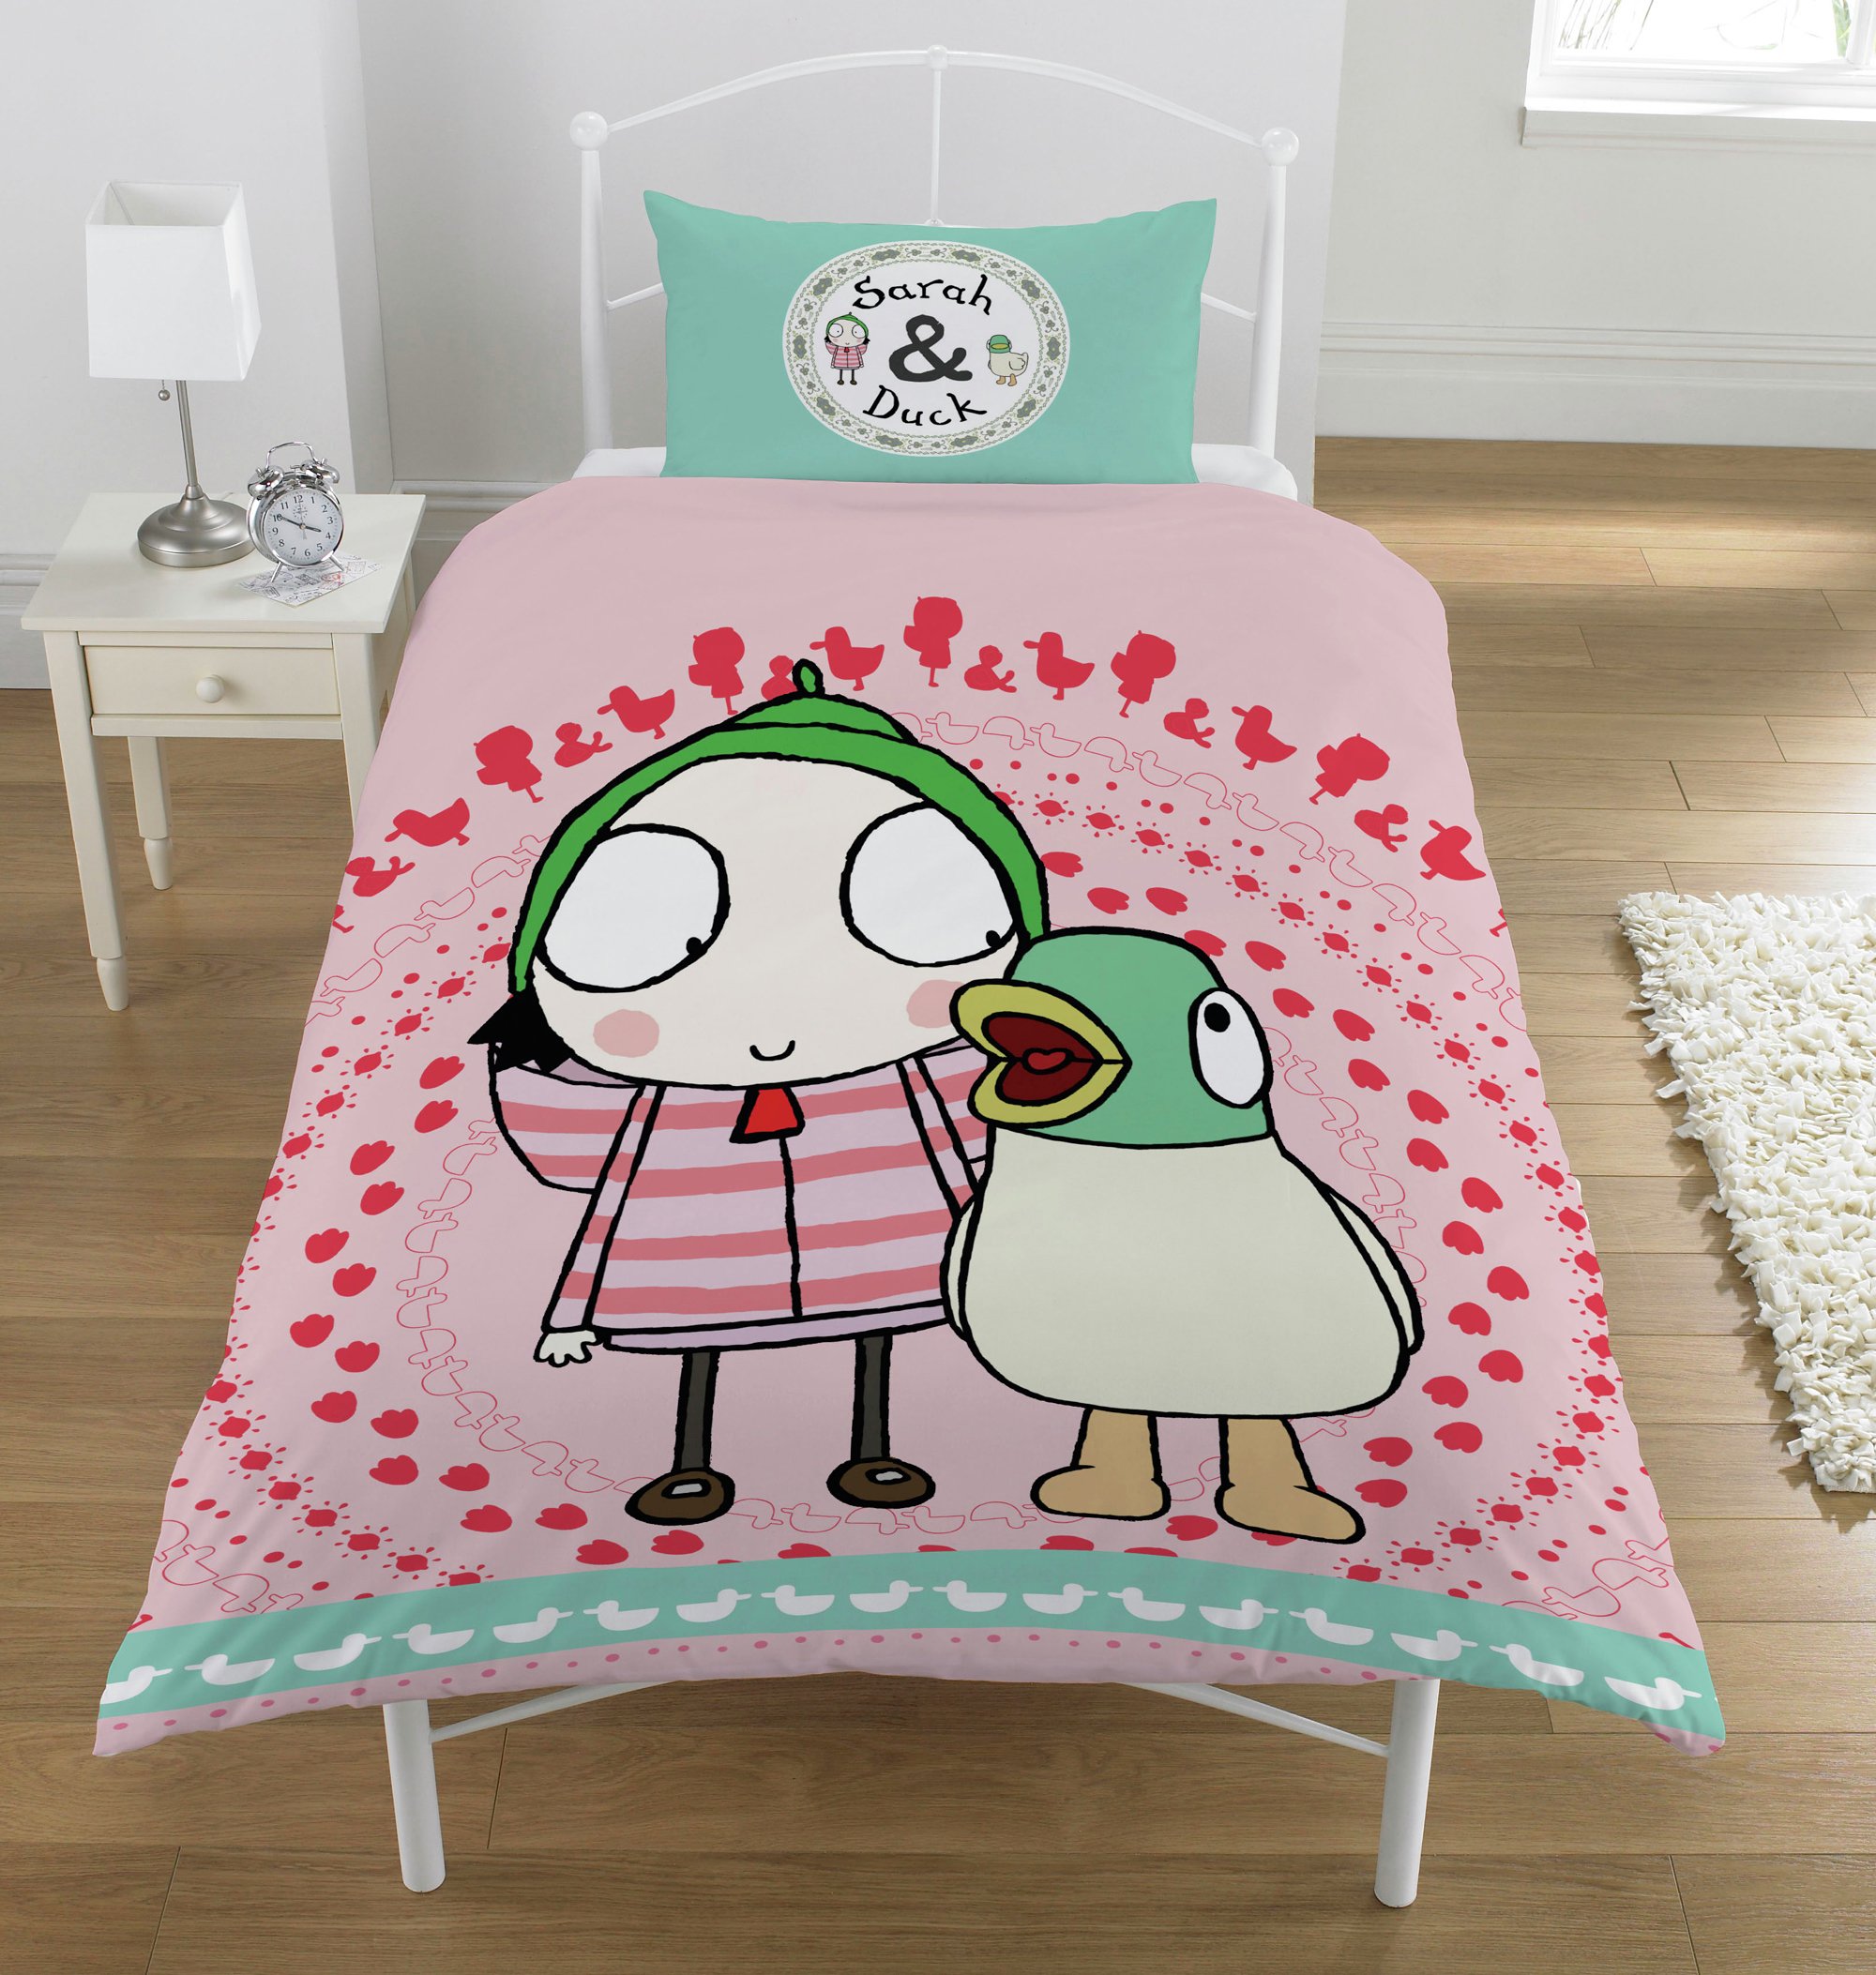 Sarah and Duck Bedding Set - Single. Review